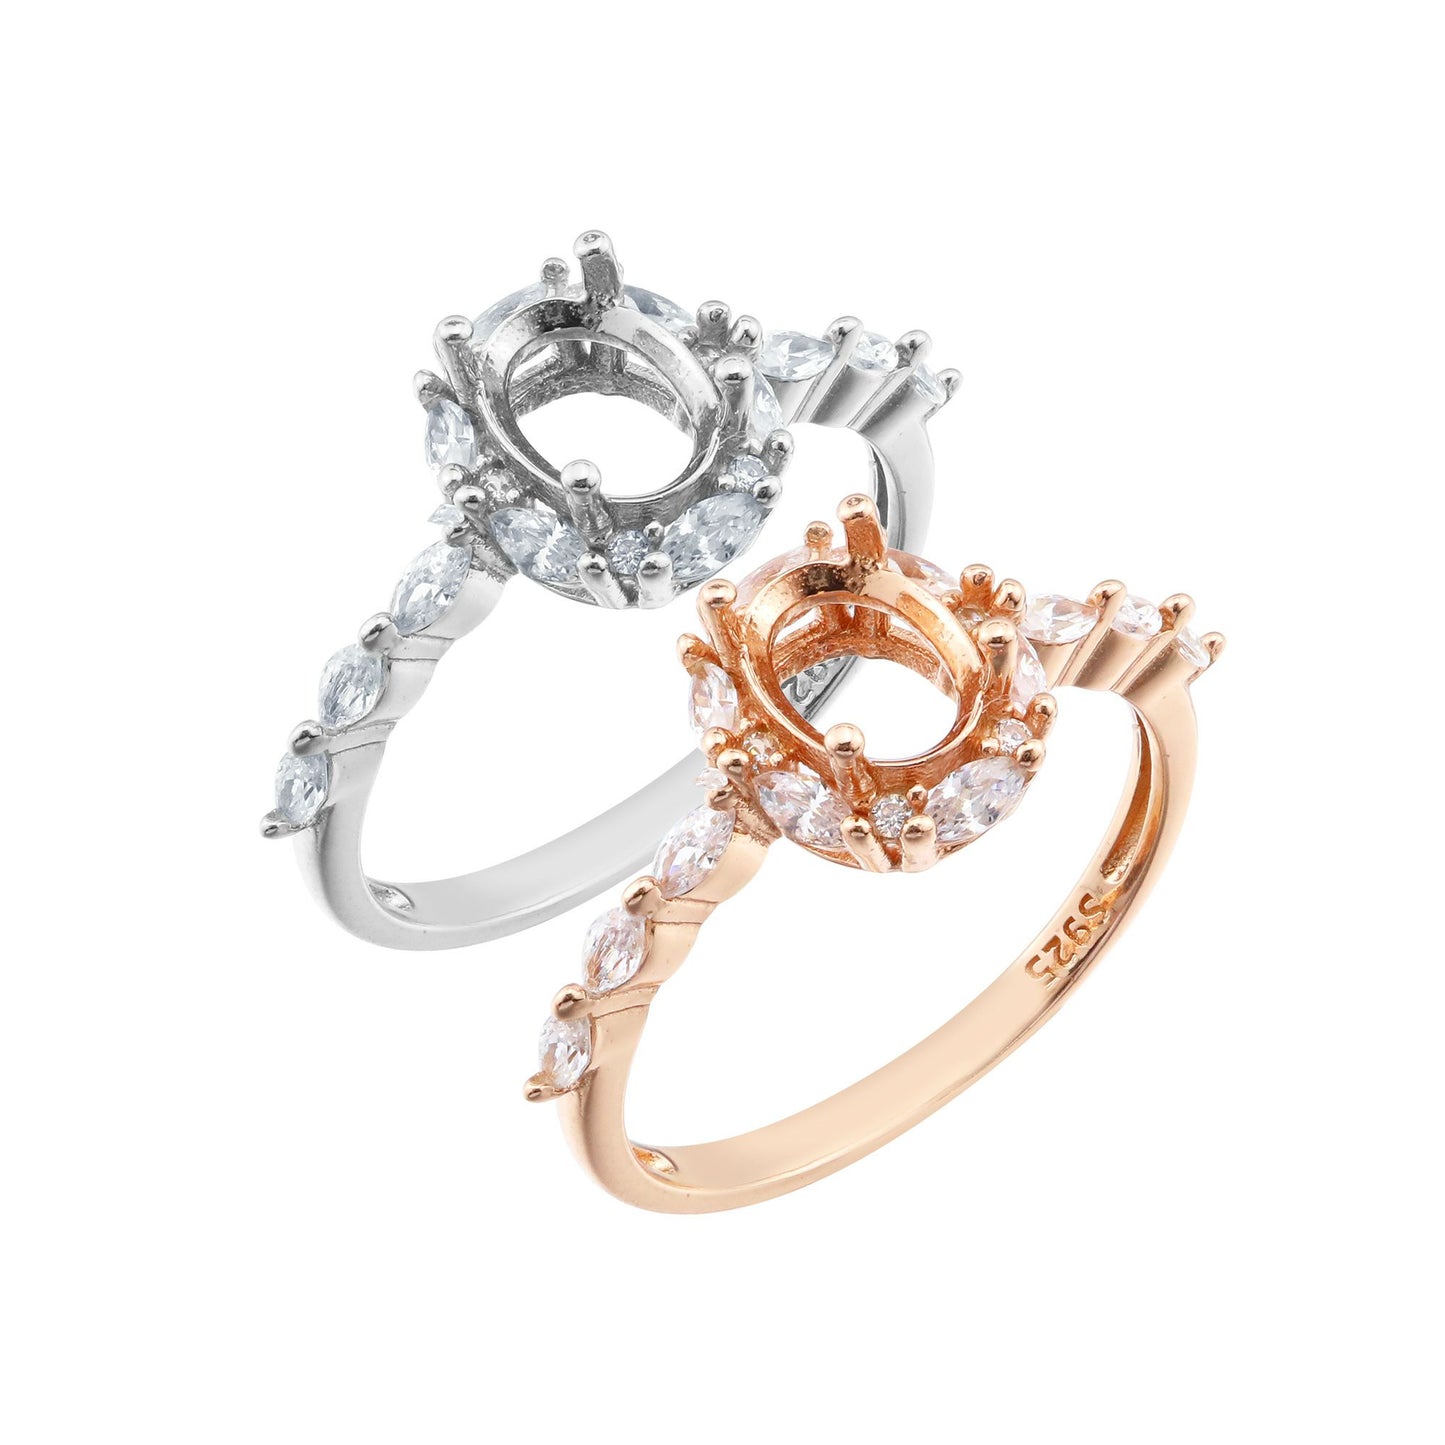 One rose gold and one silver vintage style halo semi mount with pave marquise gems.